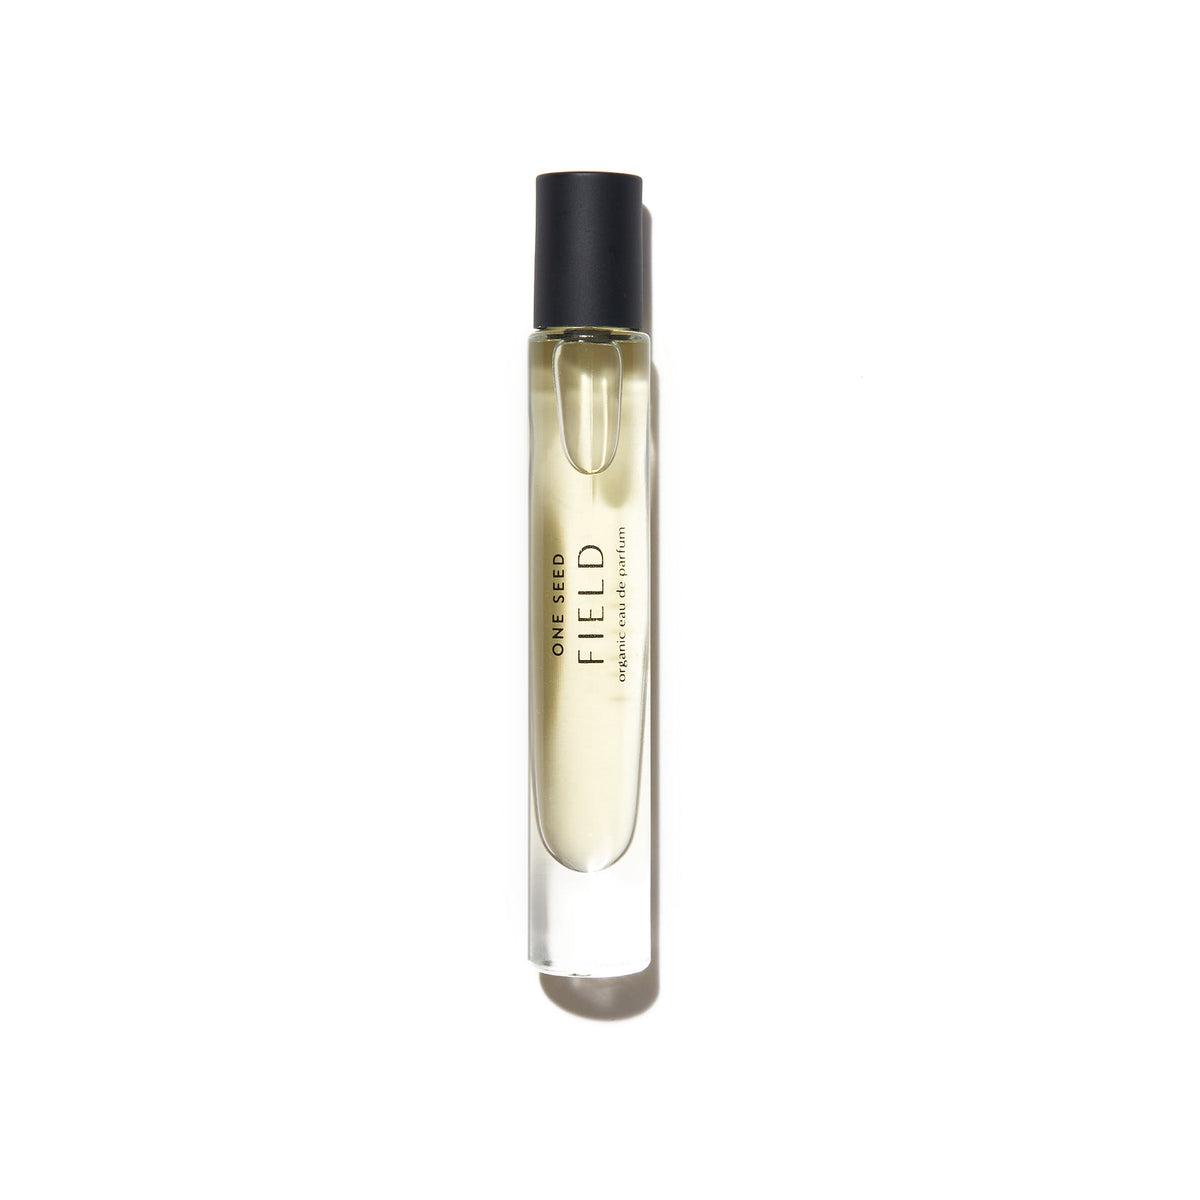 One Seed - Field Rollerball 9ml - The Bare Theory